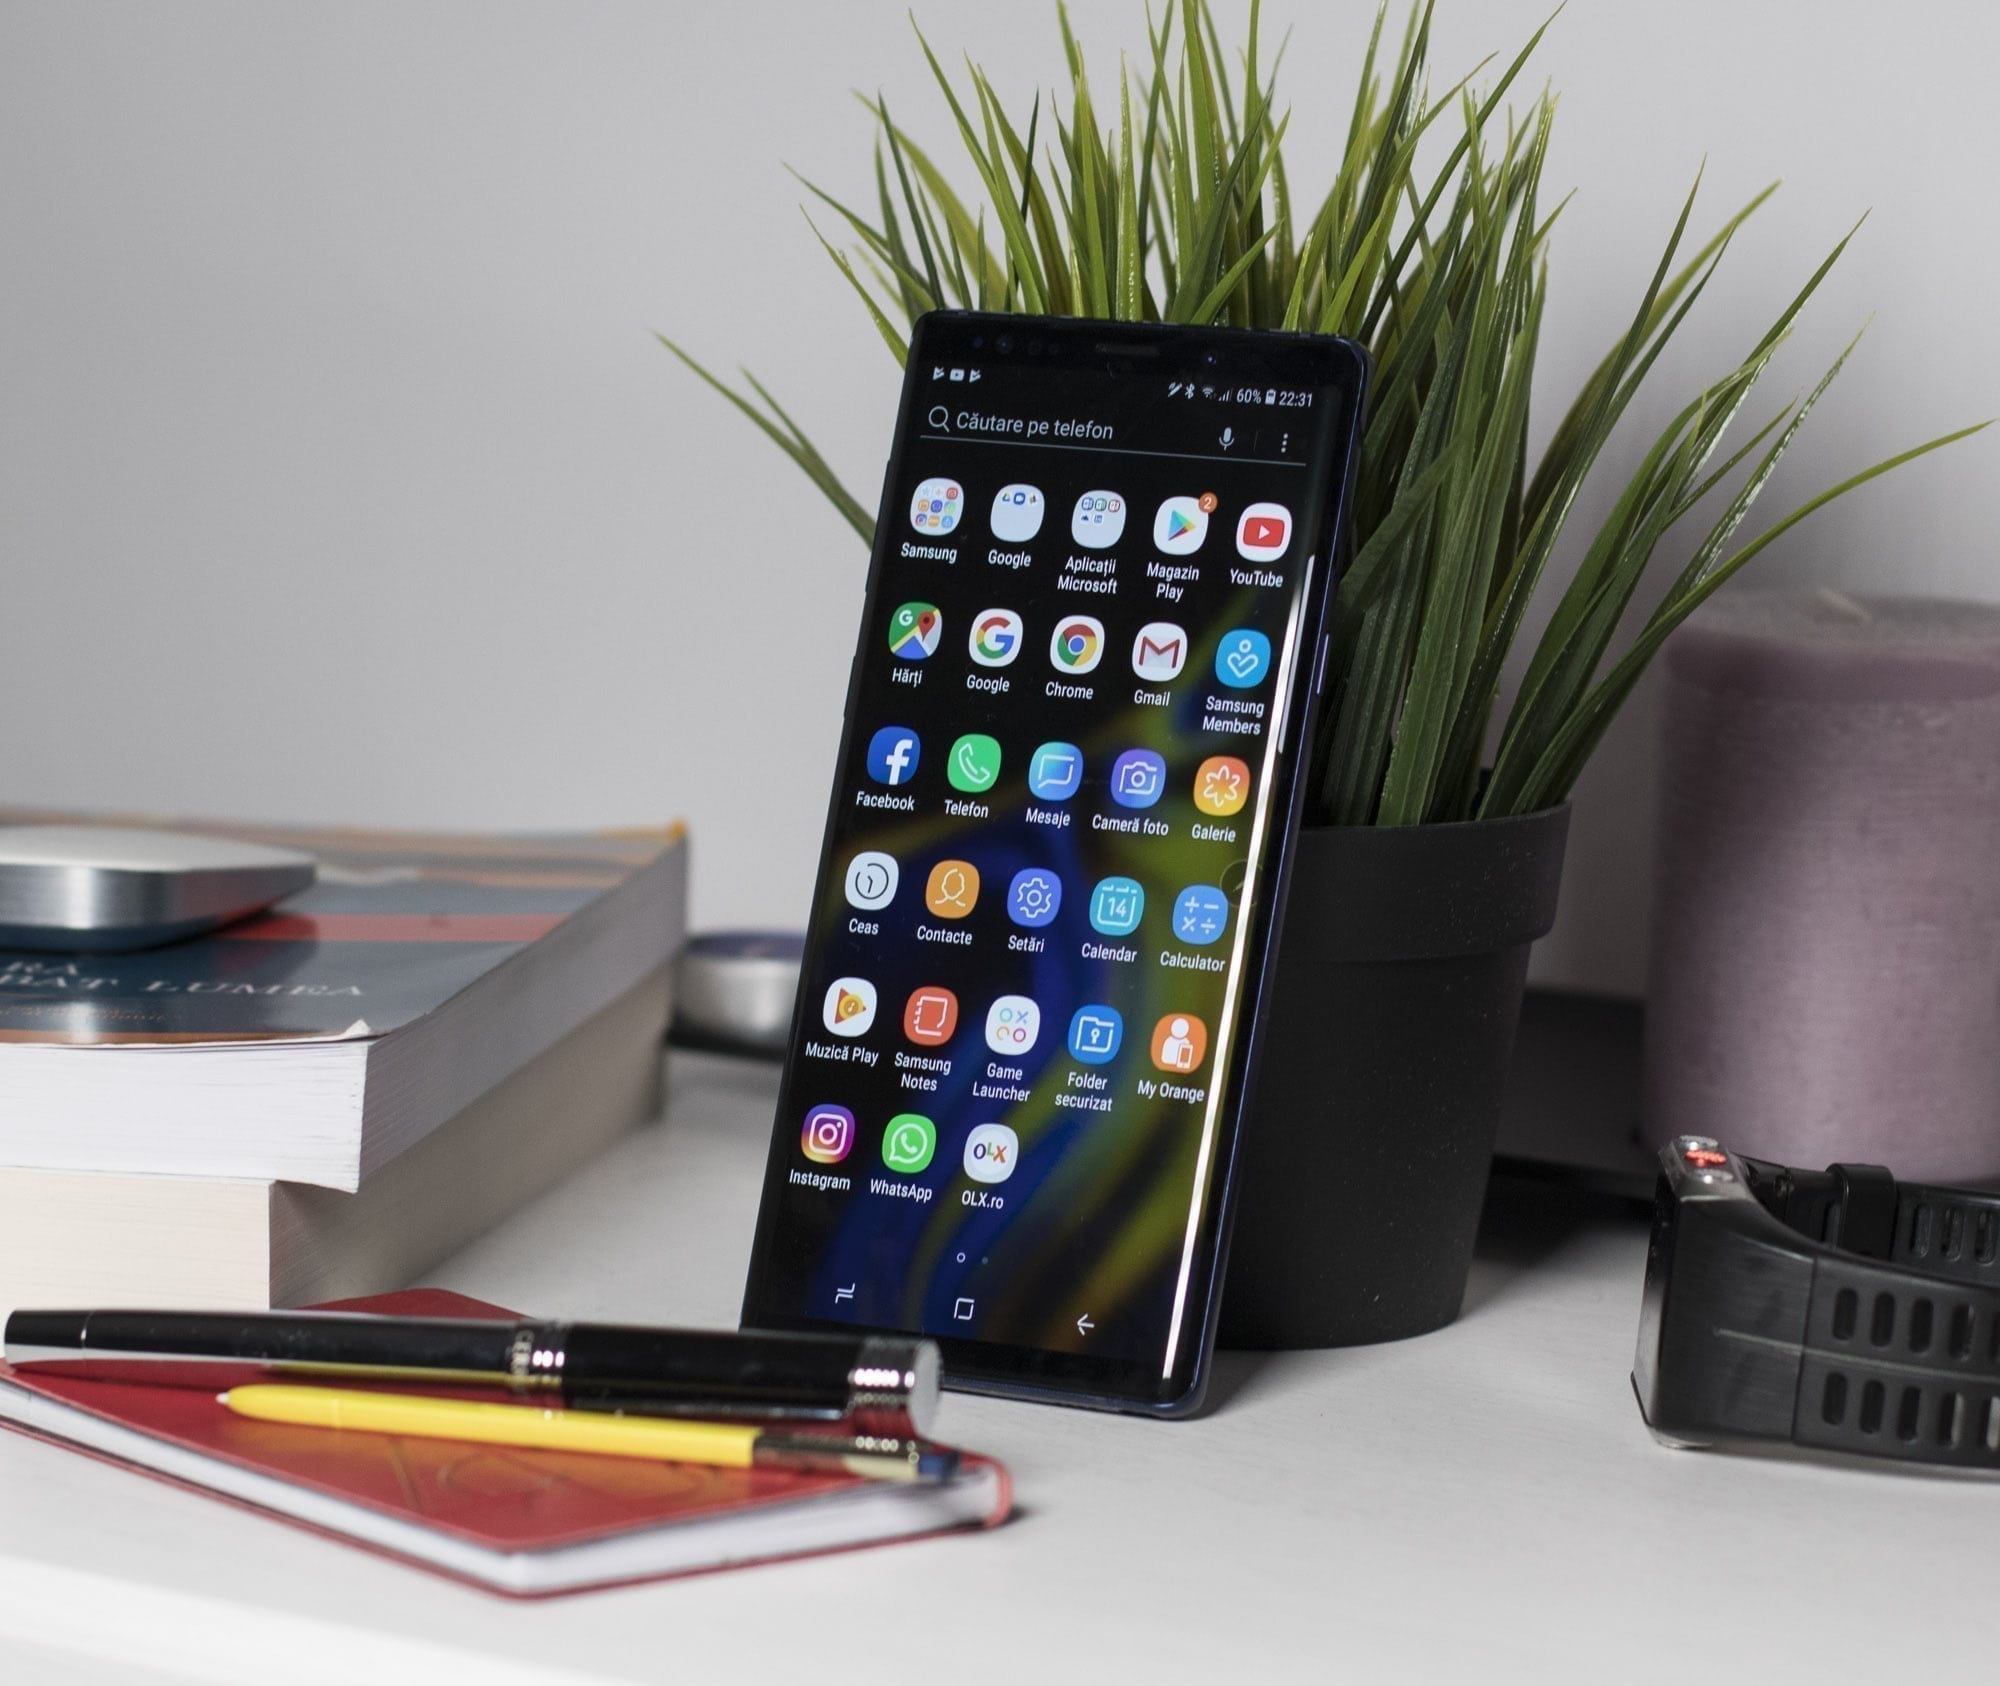 Samsung Galaxy Note9 review: Cel mai bun smartphone cu Android